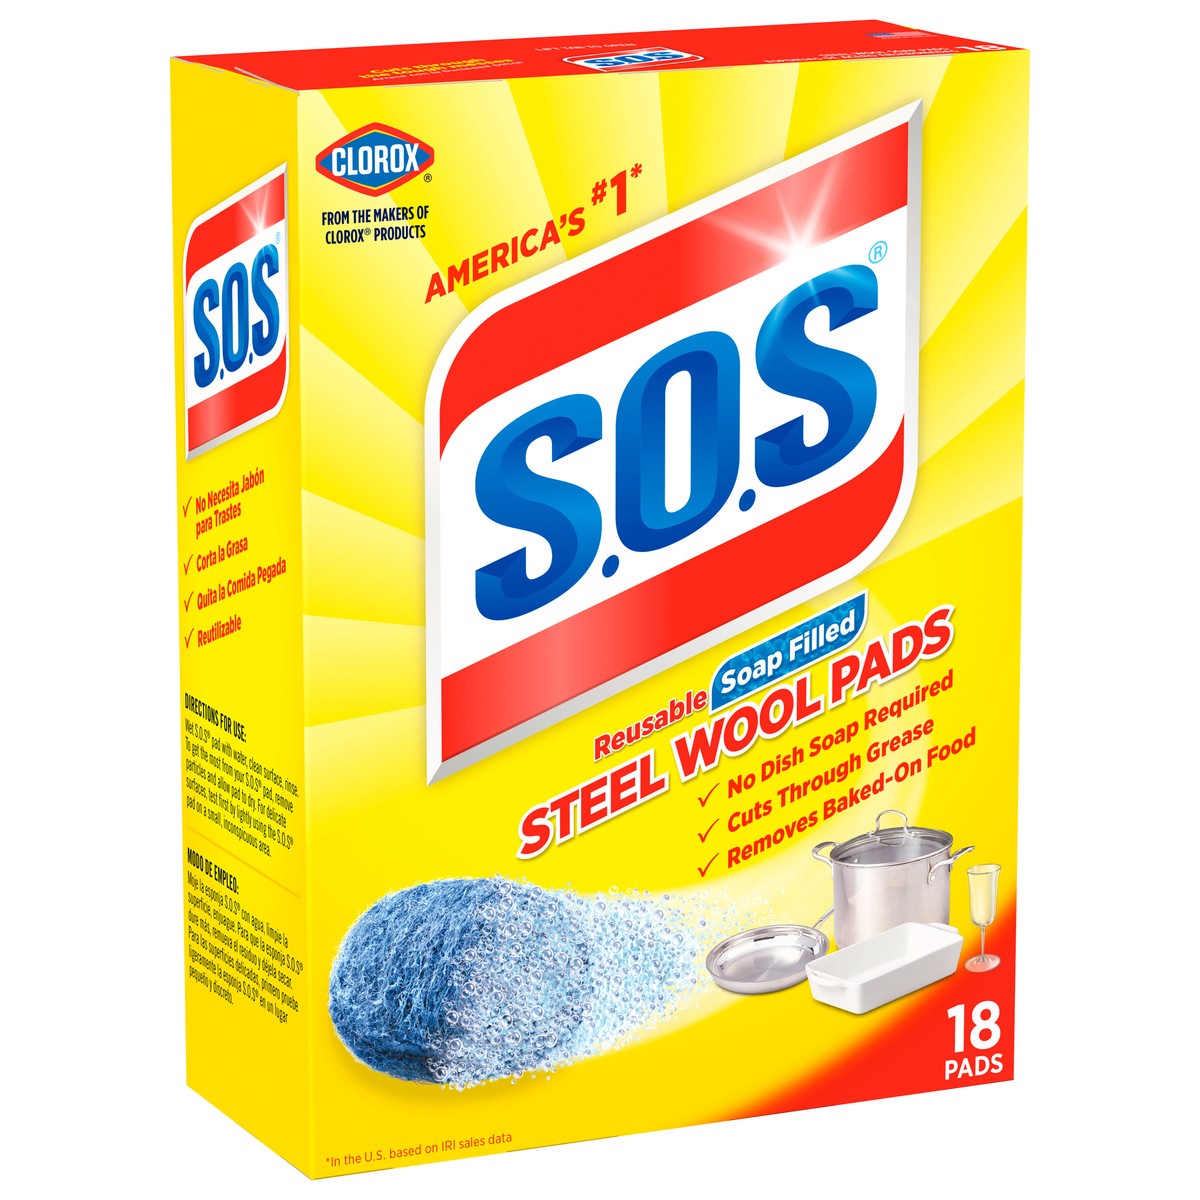 slide 10 of 14, S.o.s. Reusable Soap Filled Steel Wool Pads, 18 ct